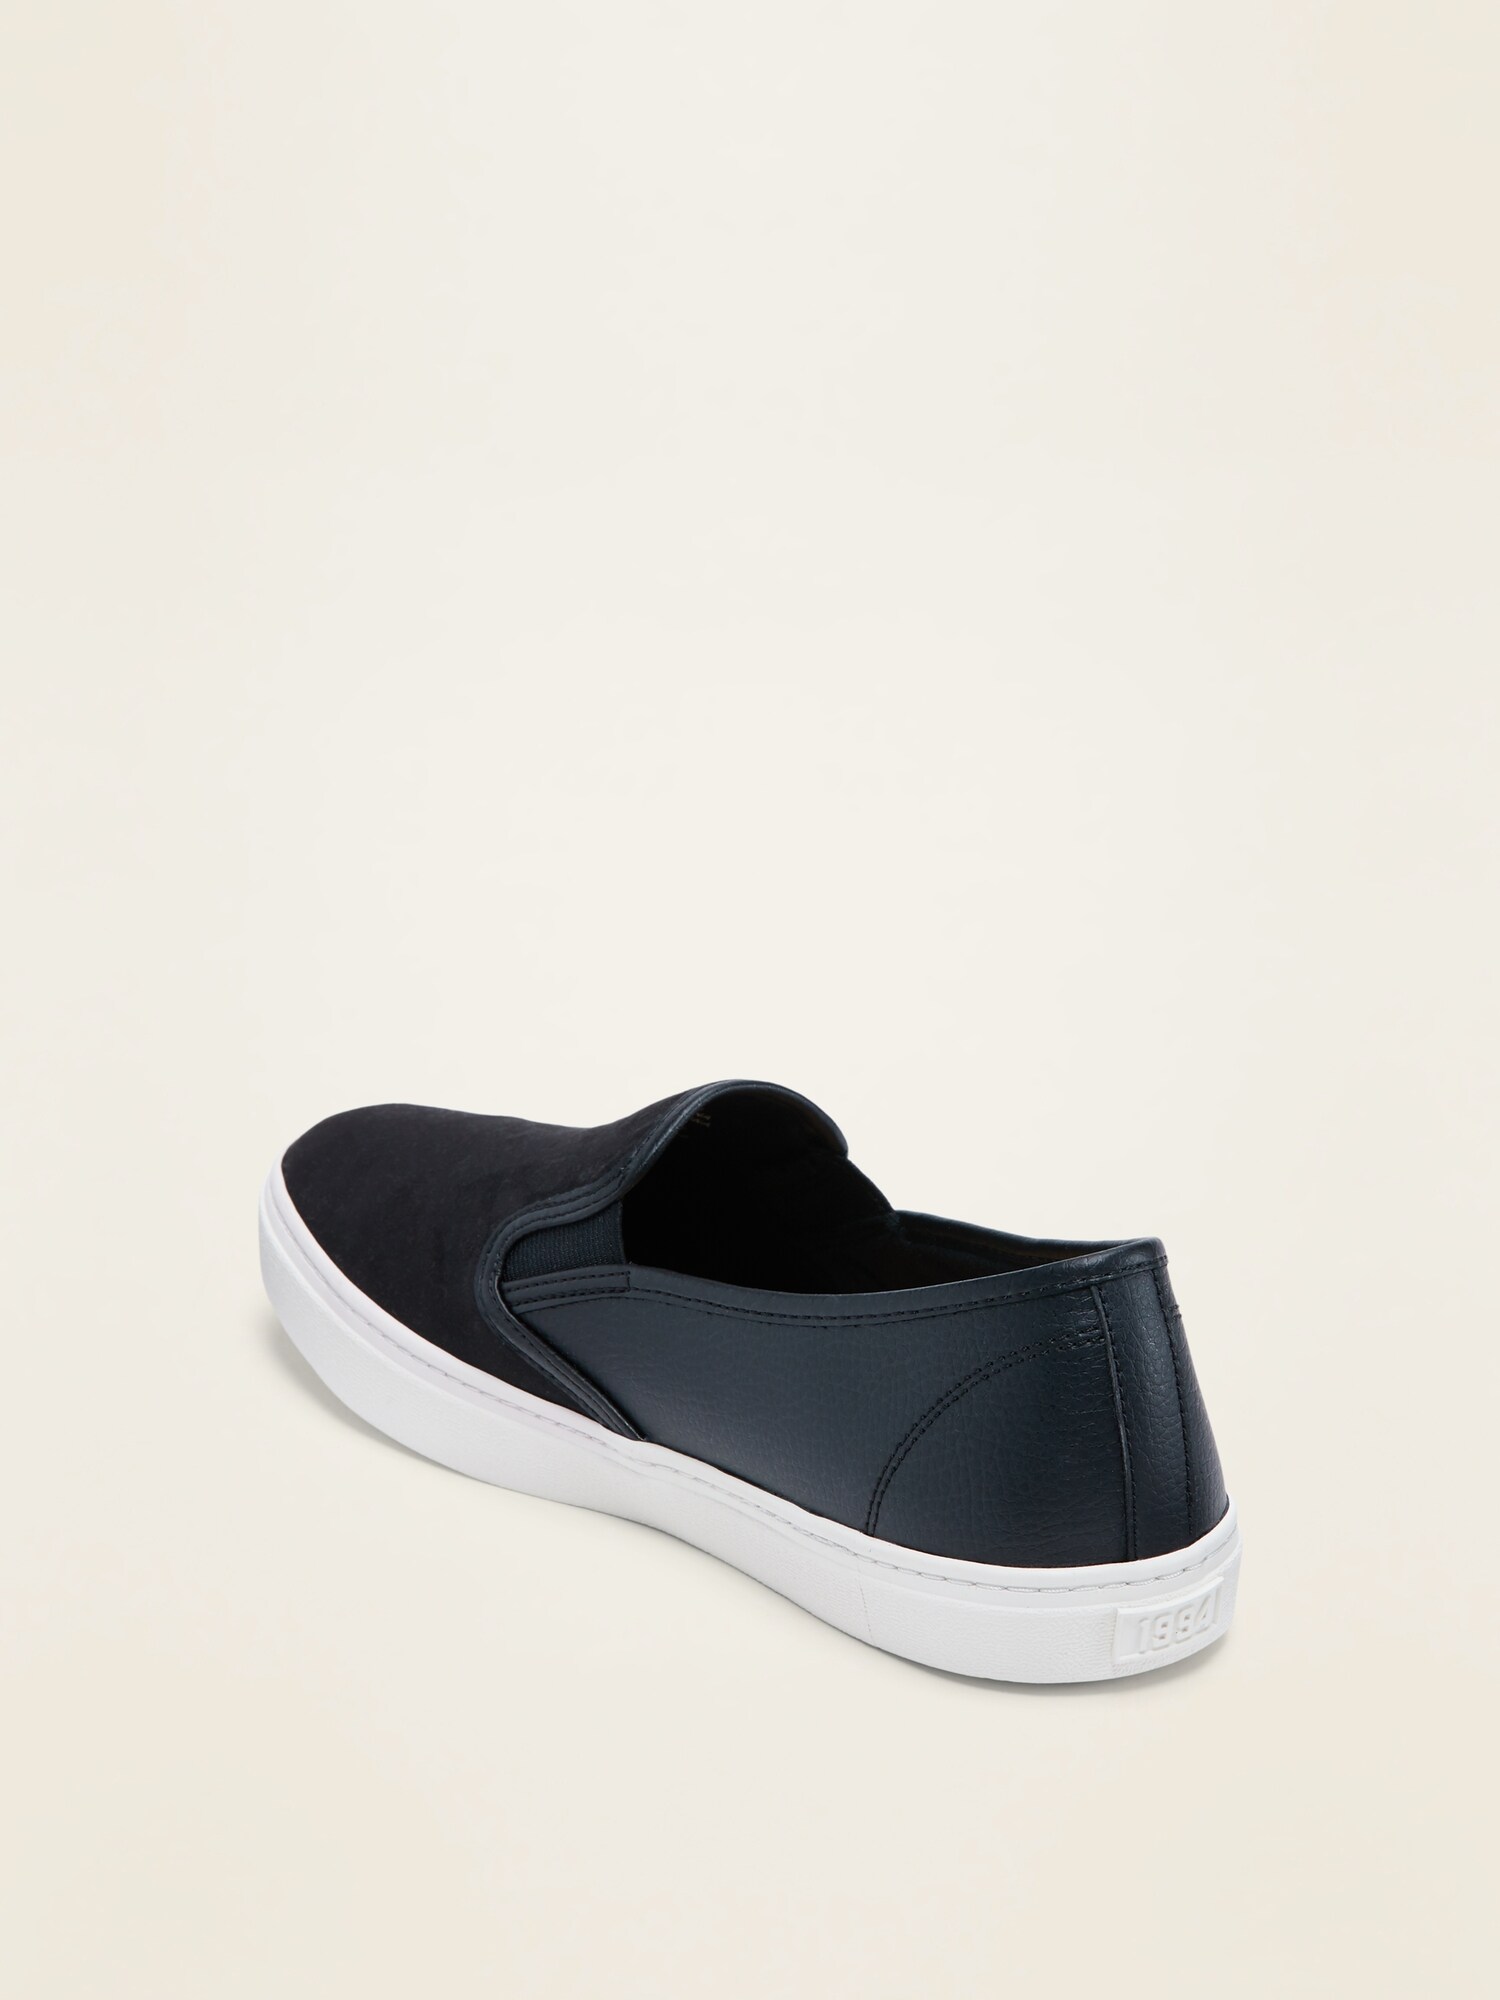 leather slip on shoes white